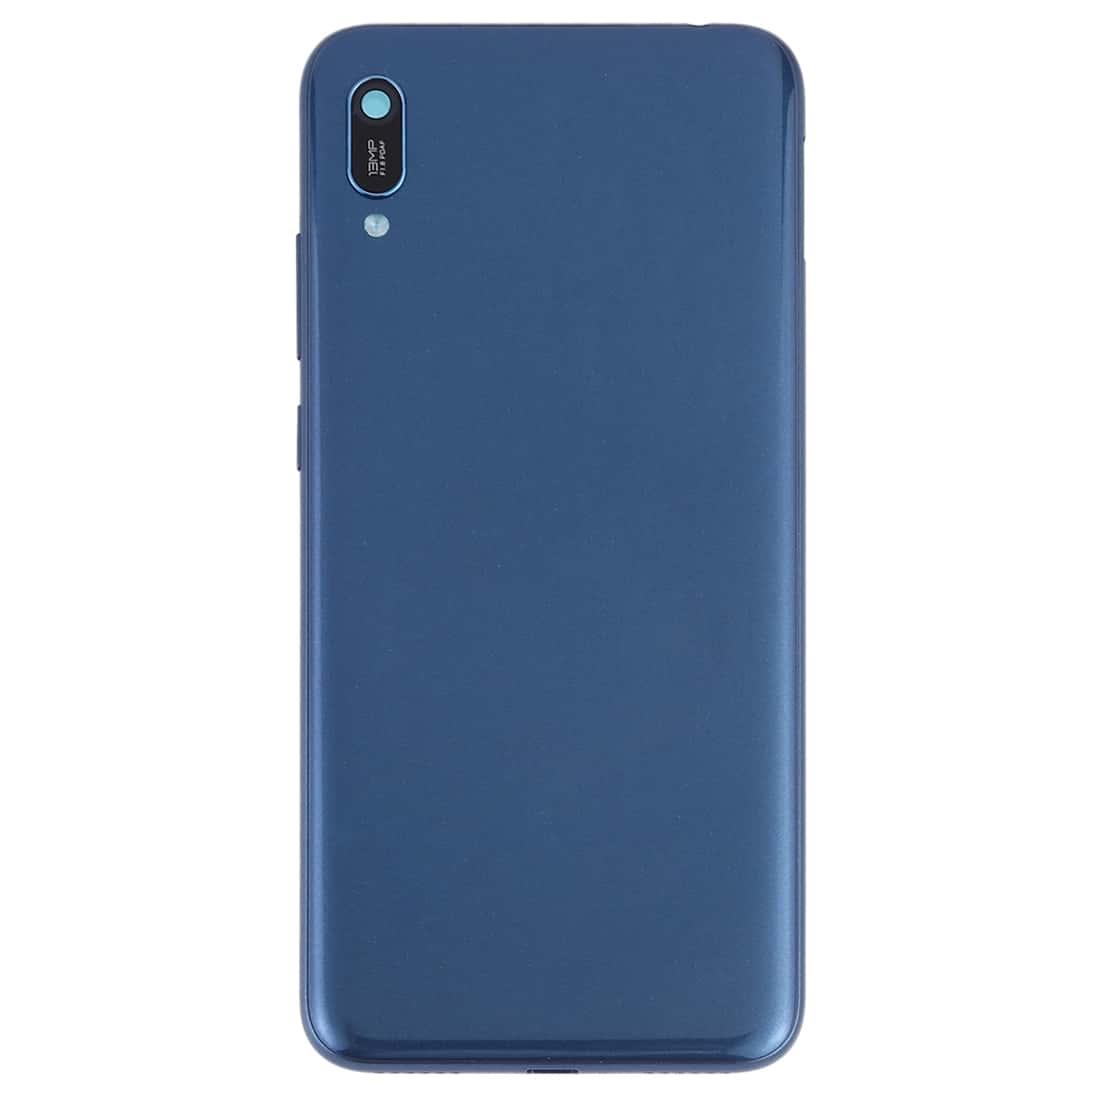 Back Panel Housing Body for Huawei Y6 2019 Blue with Camera Lens